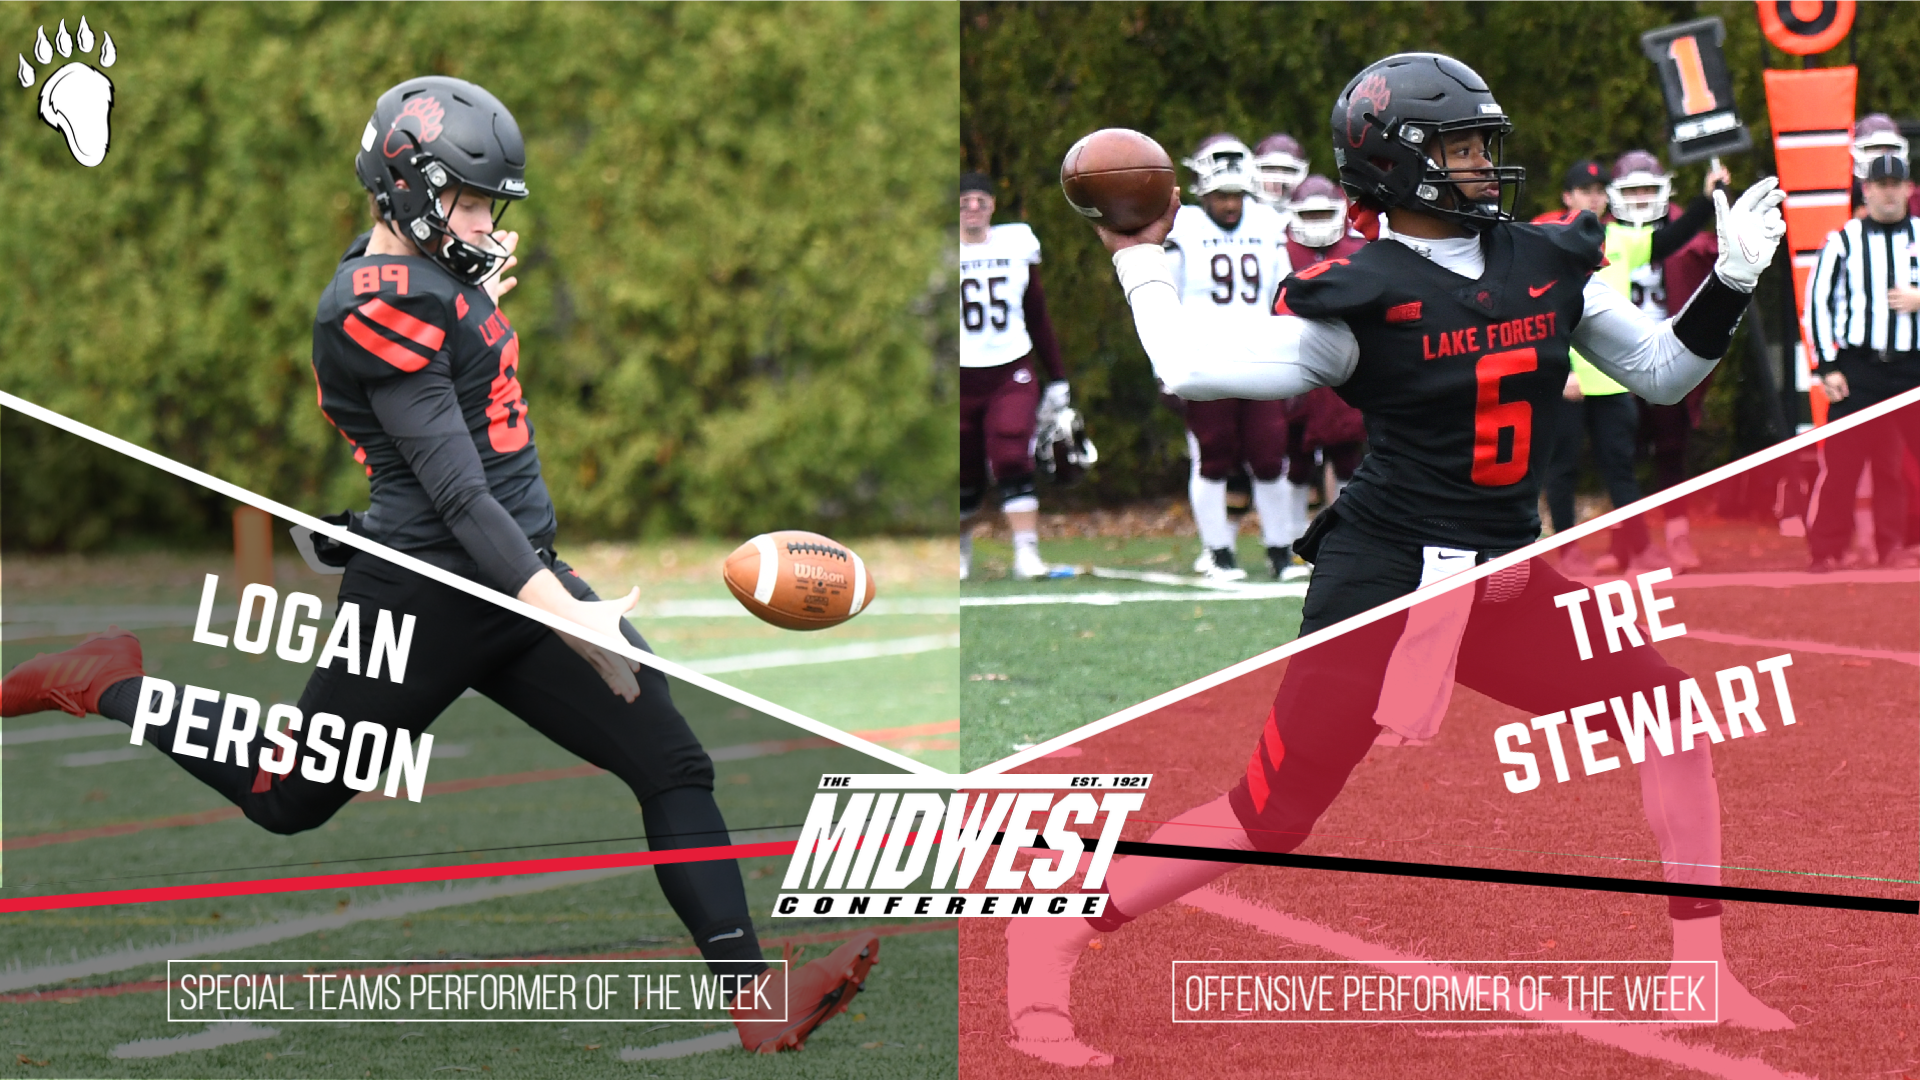 Persson and Stewart Named MWC Performers of the Week